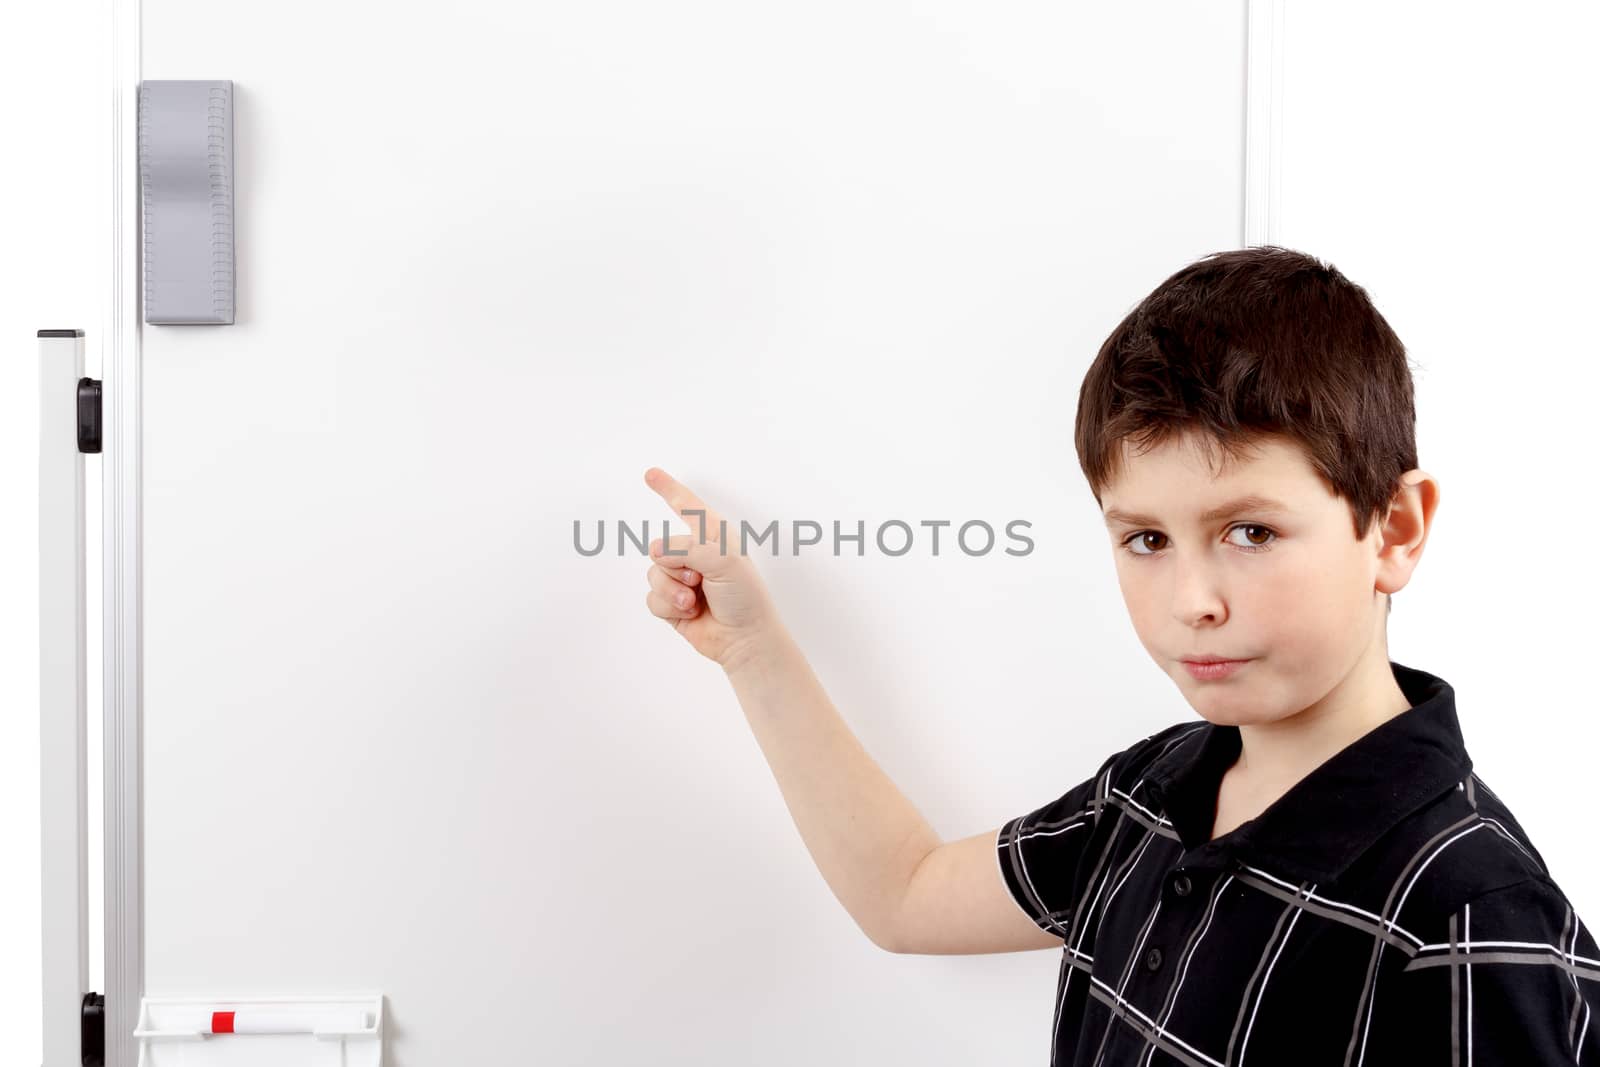 young boy student in a classroom showing on a empty white board